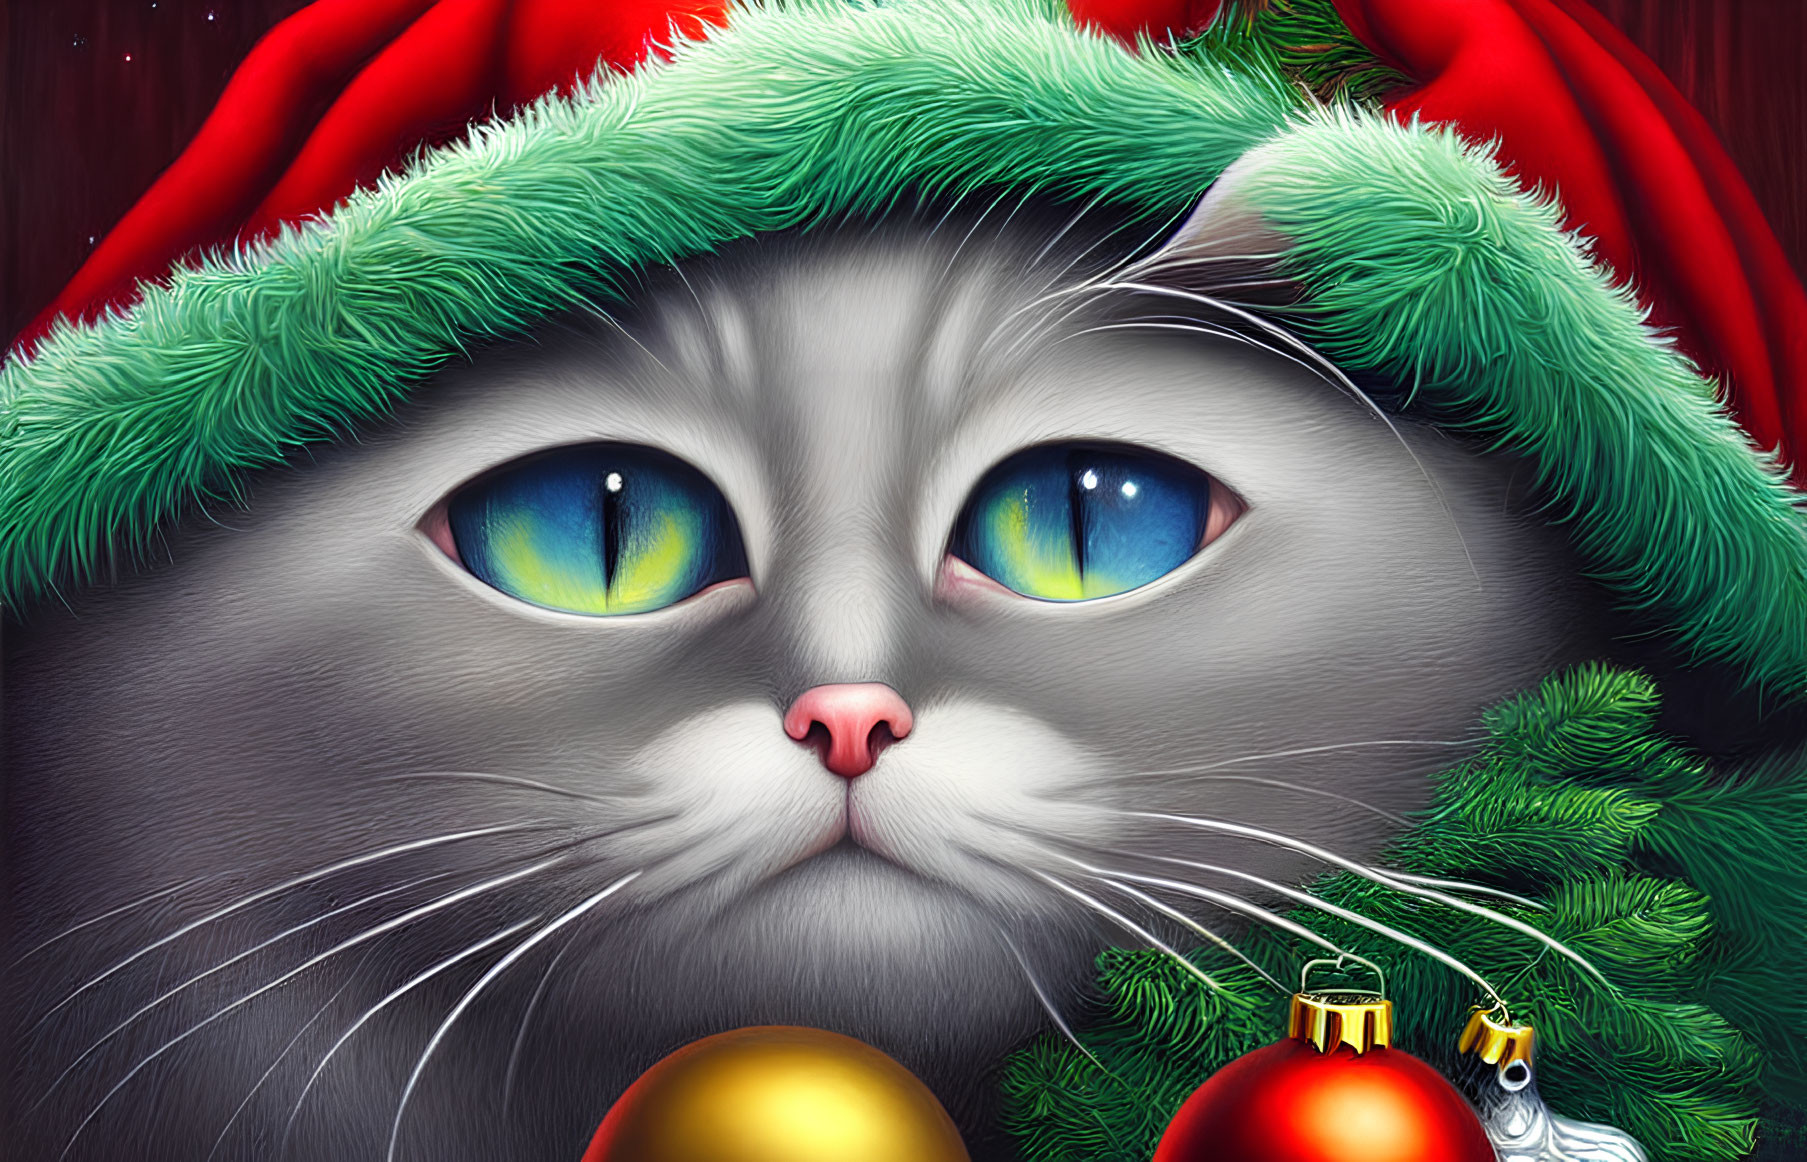 Grey Cat with Blue Eyes in Santa Hat Among Christmas Decorations